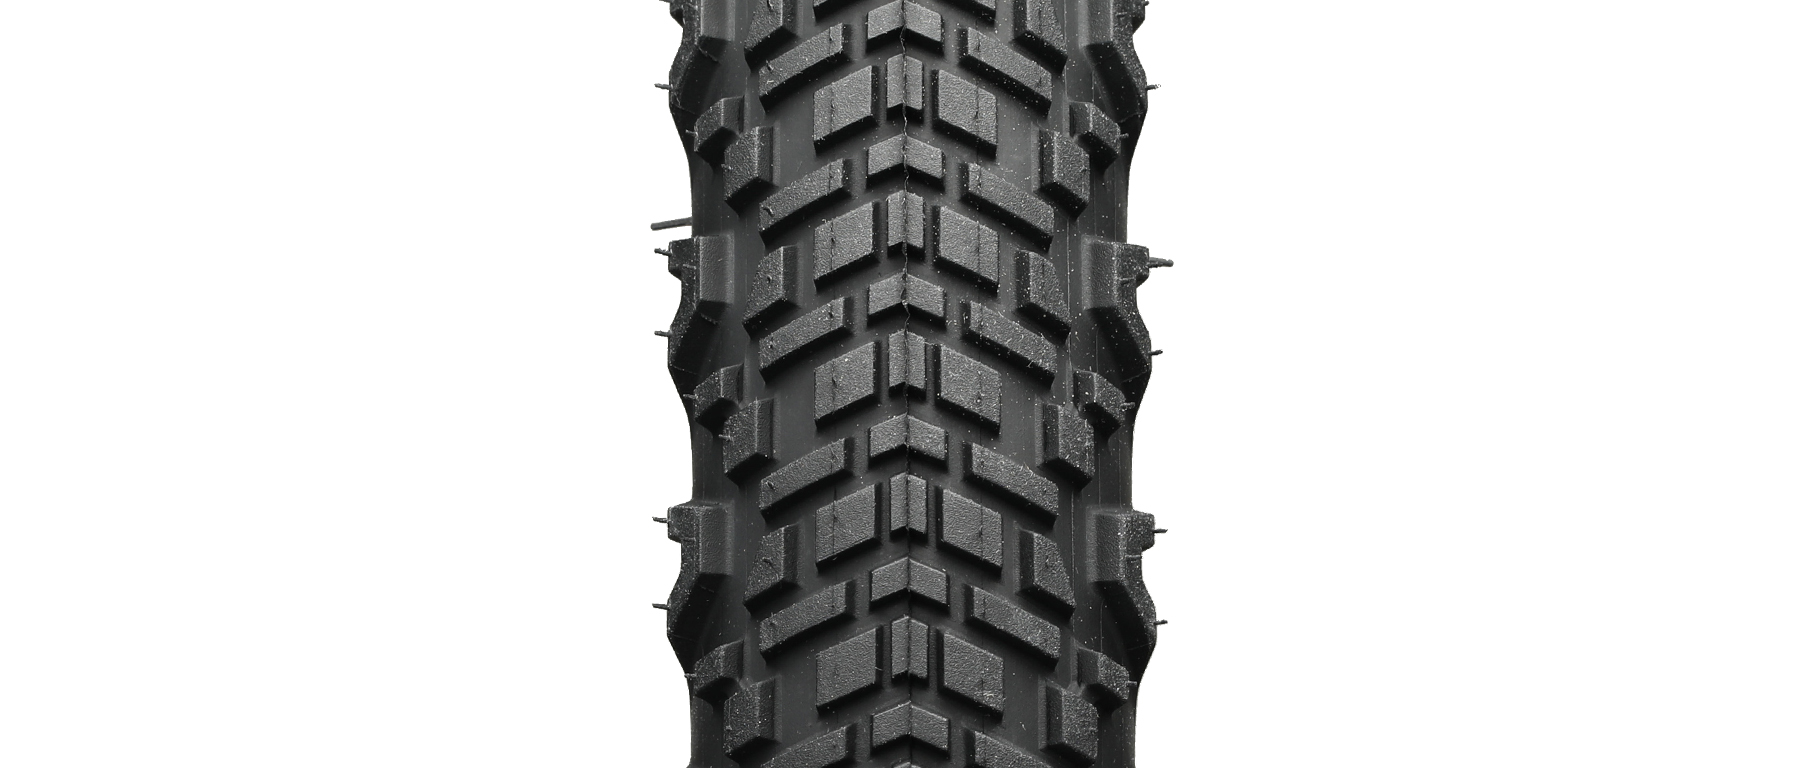 Donnelly EMP Tubeless Gravel Tire